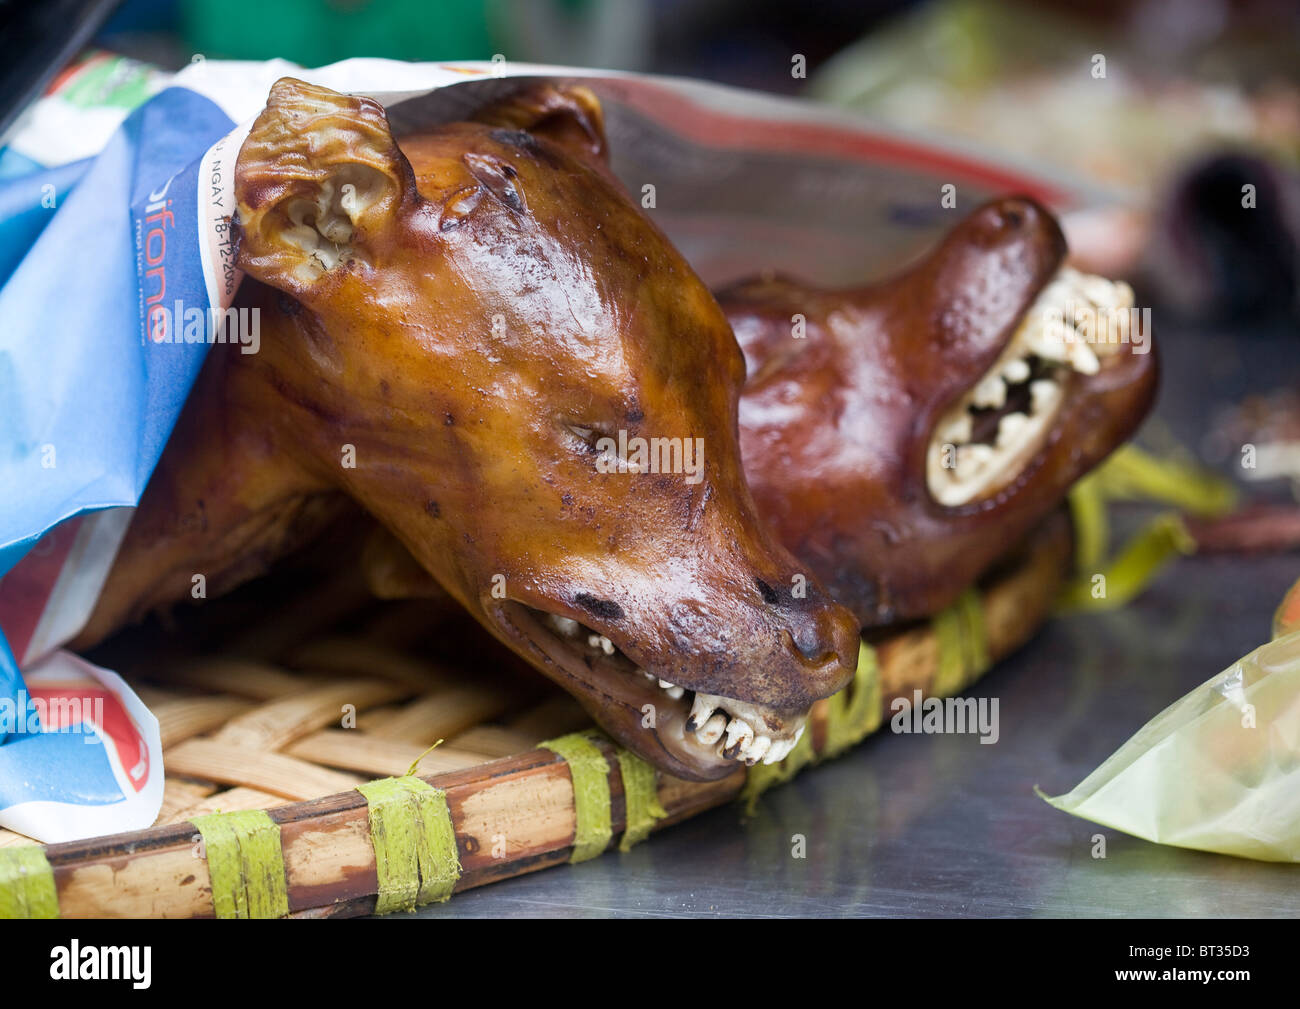 Roast Dog on sale in Hanoi Vietnam - An example of the strange or weird food eaten by people around the world Stock Photo